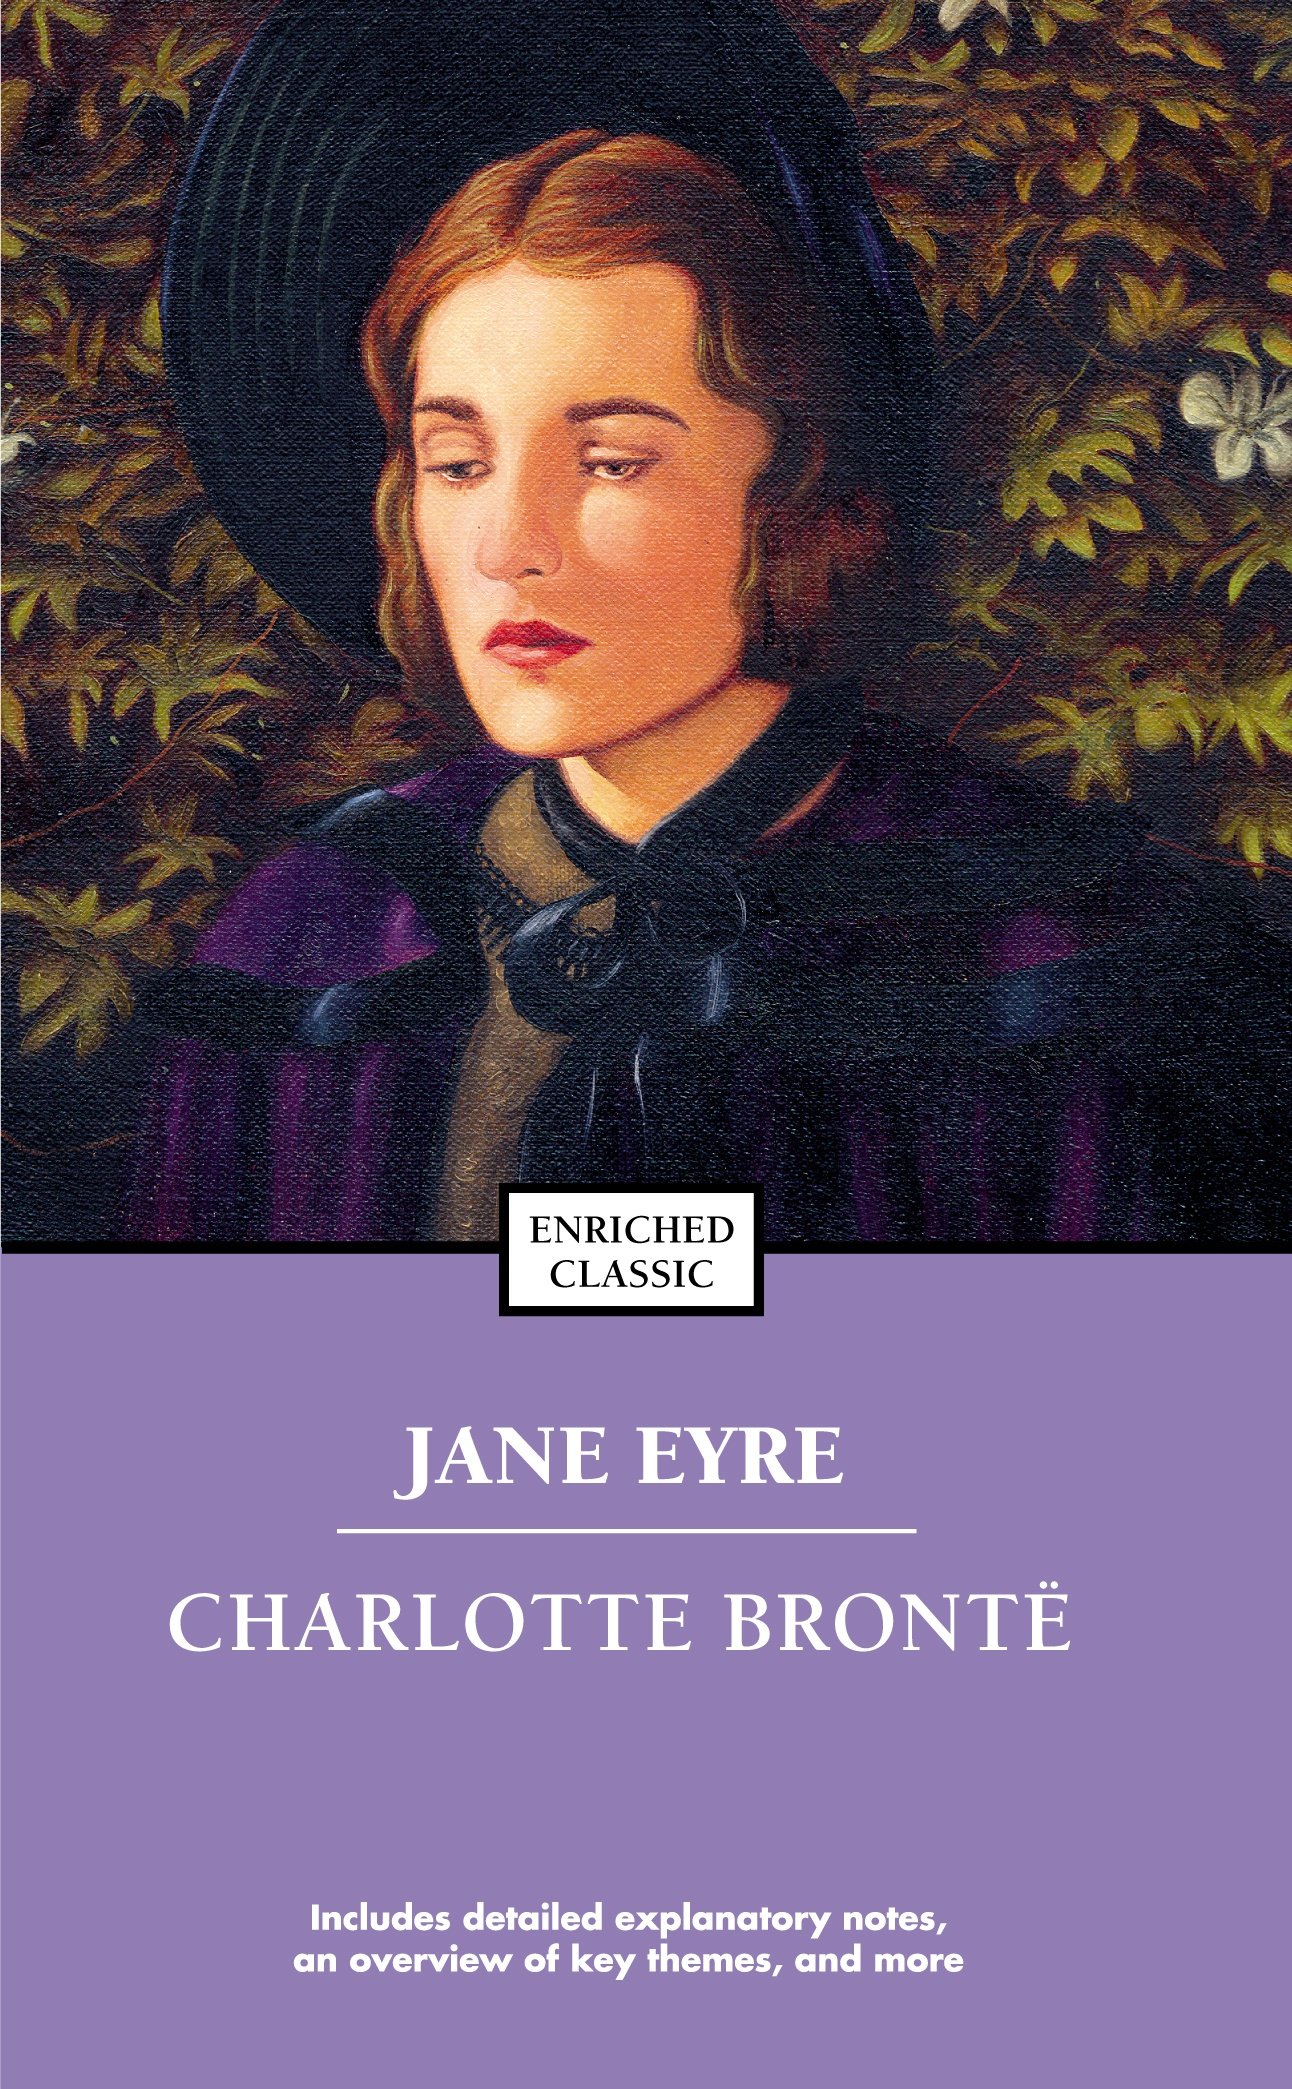 Jane Eyre, by Charlotte Bronte - book that everyone should read